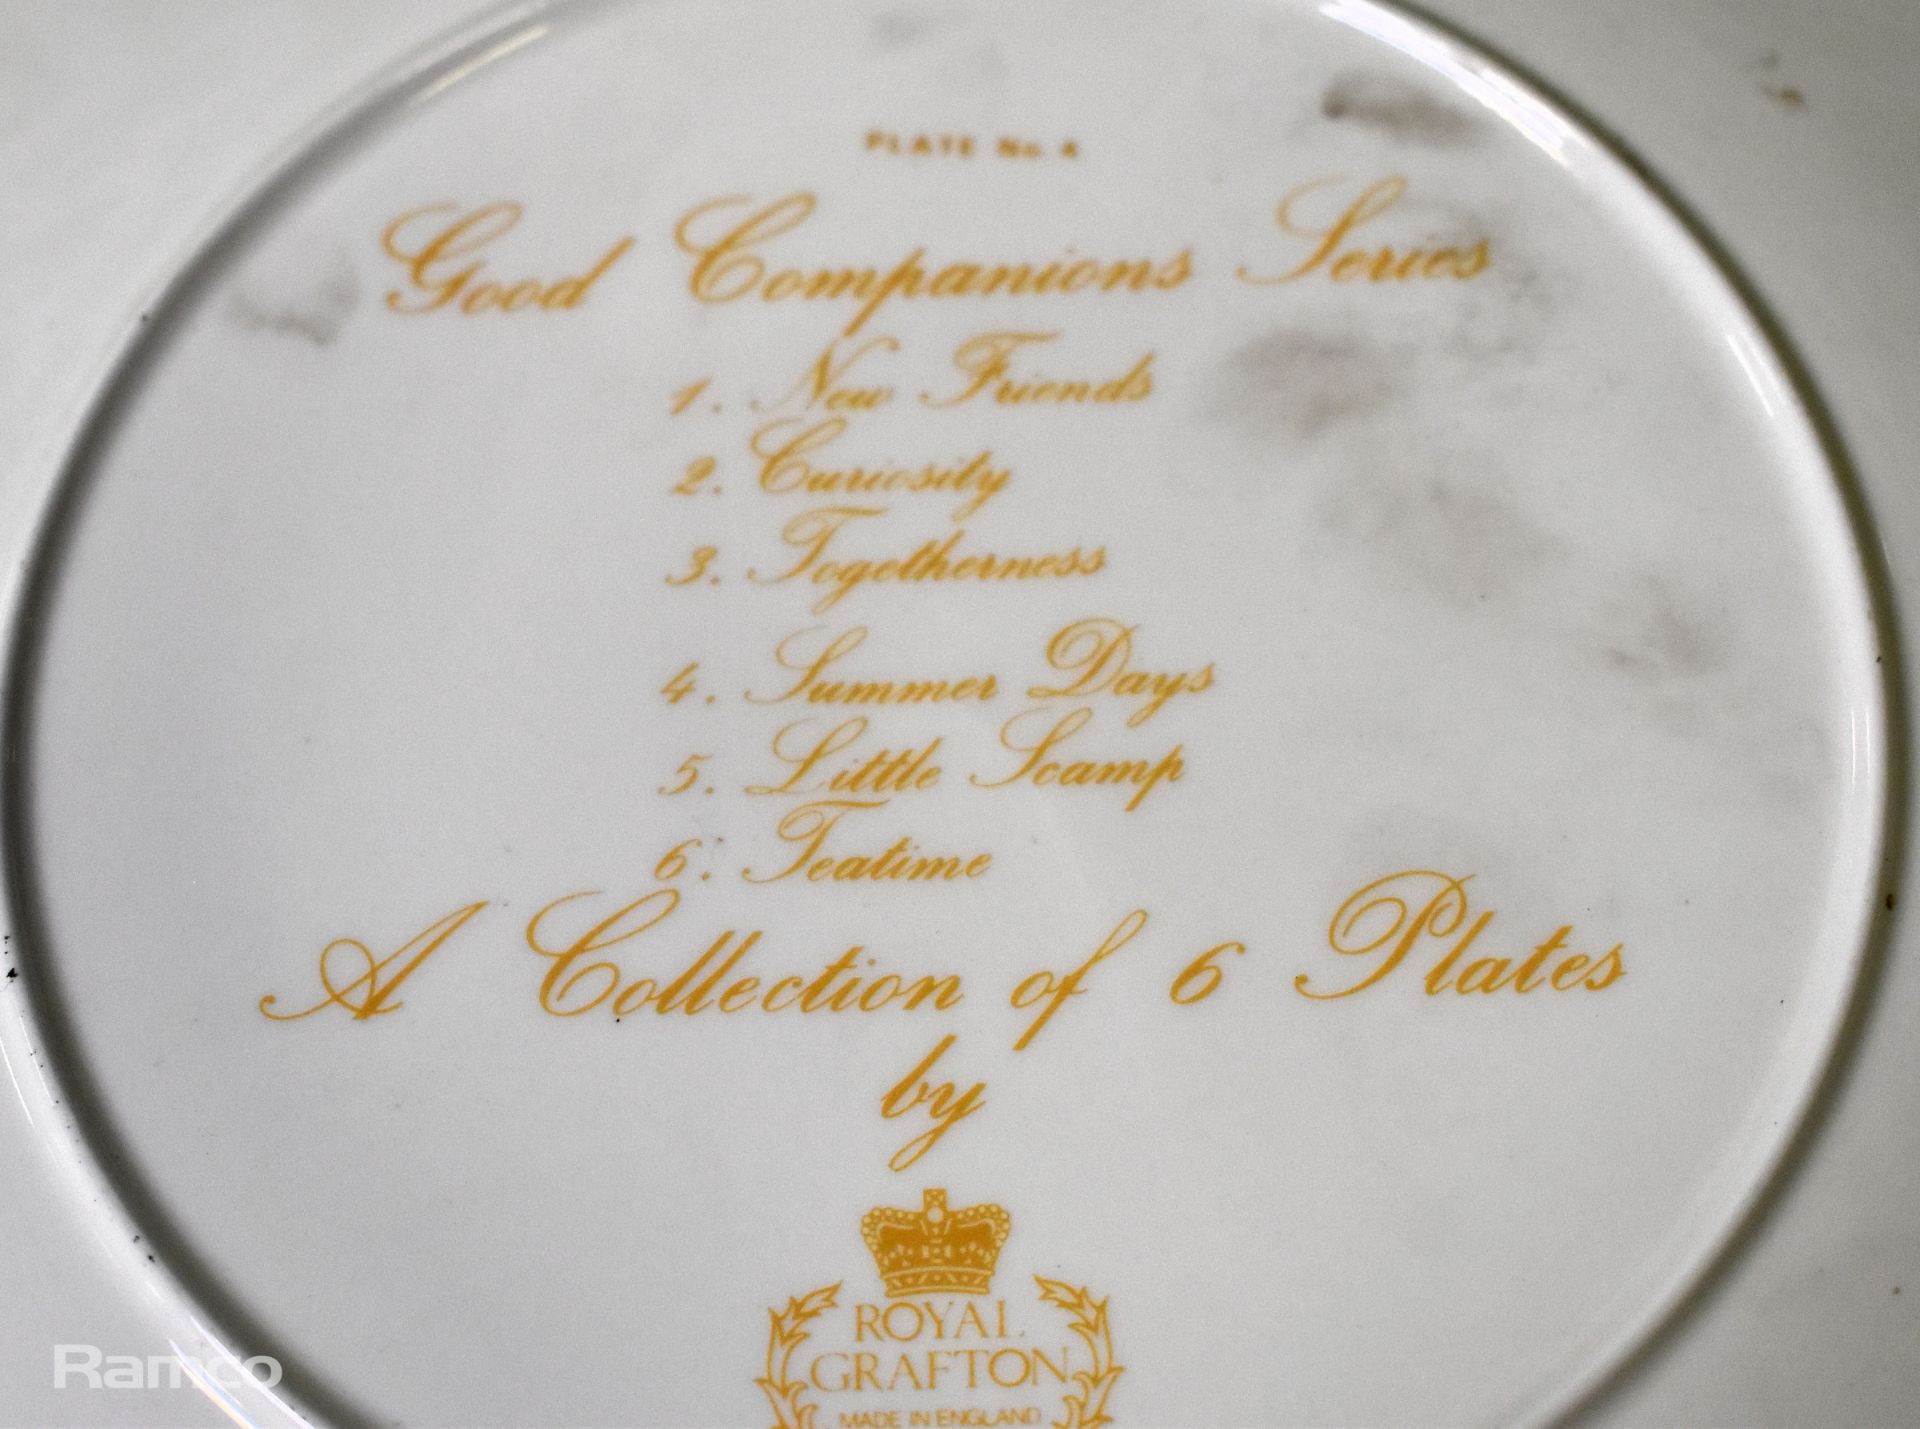 Decorative plates - please see description for full details - Image 13 of 17